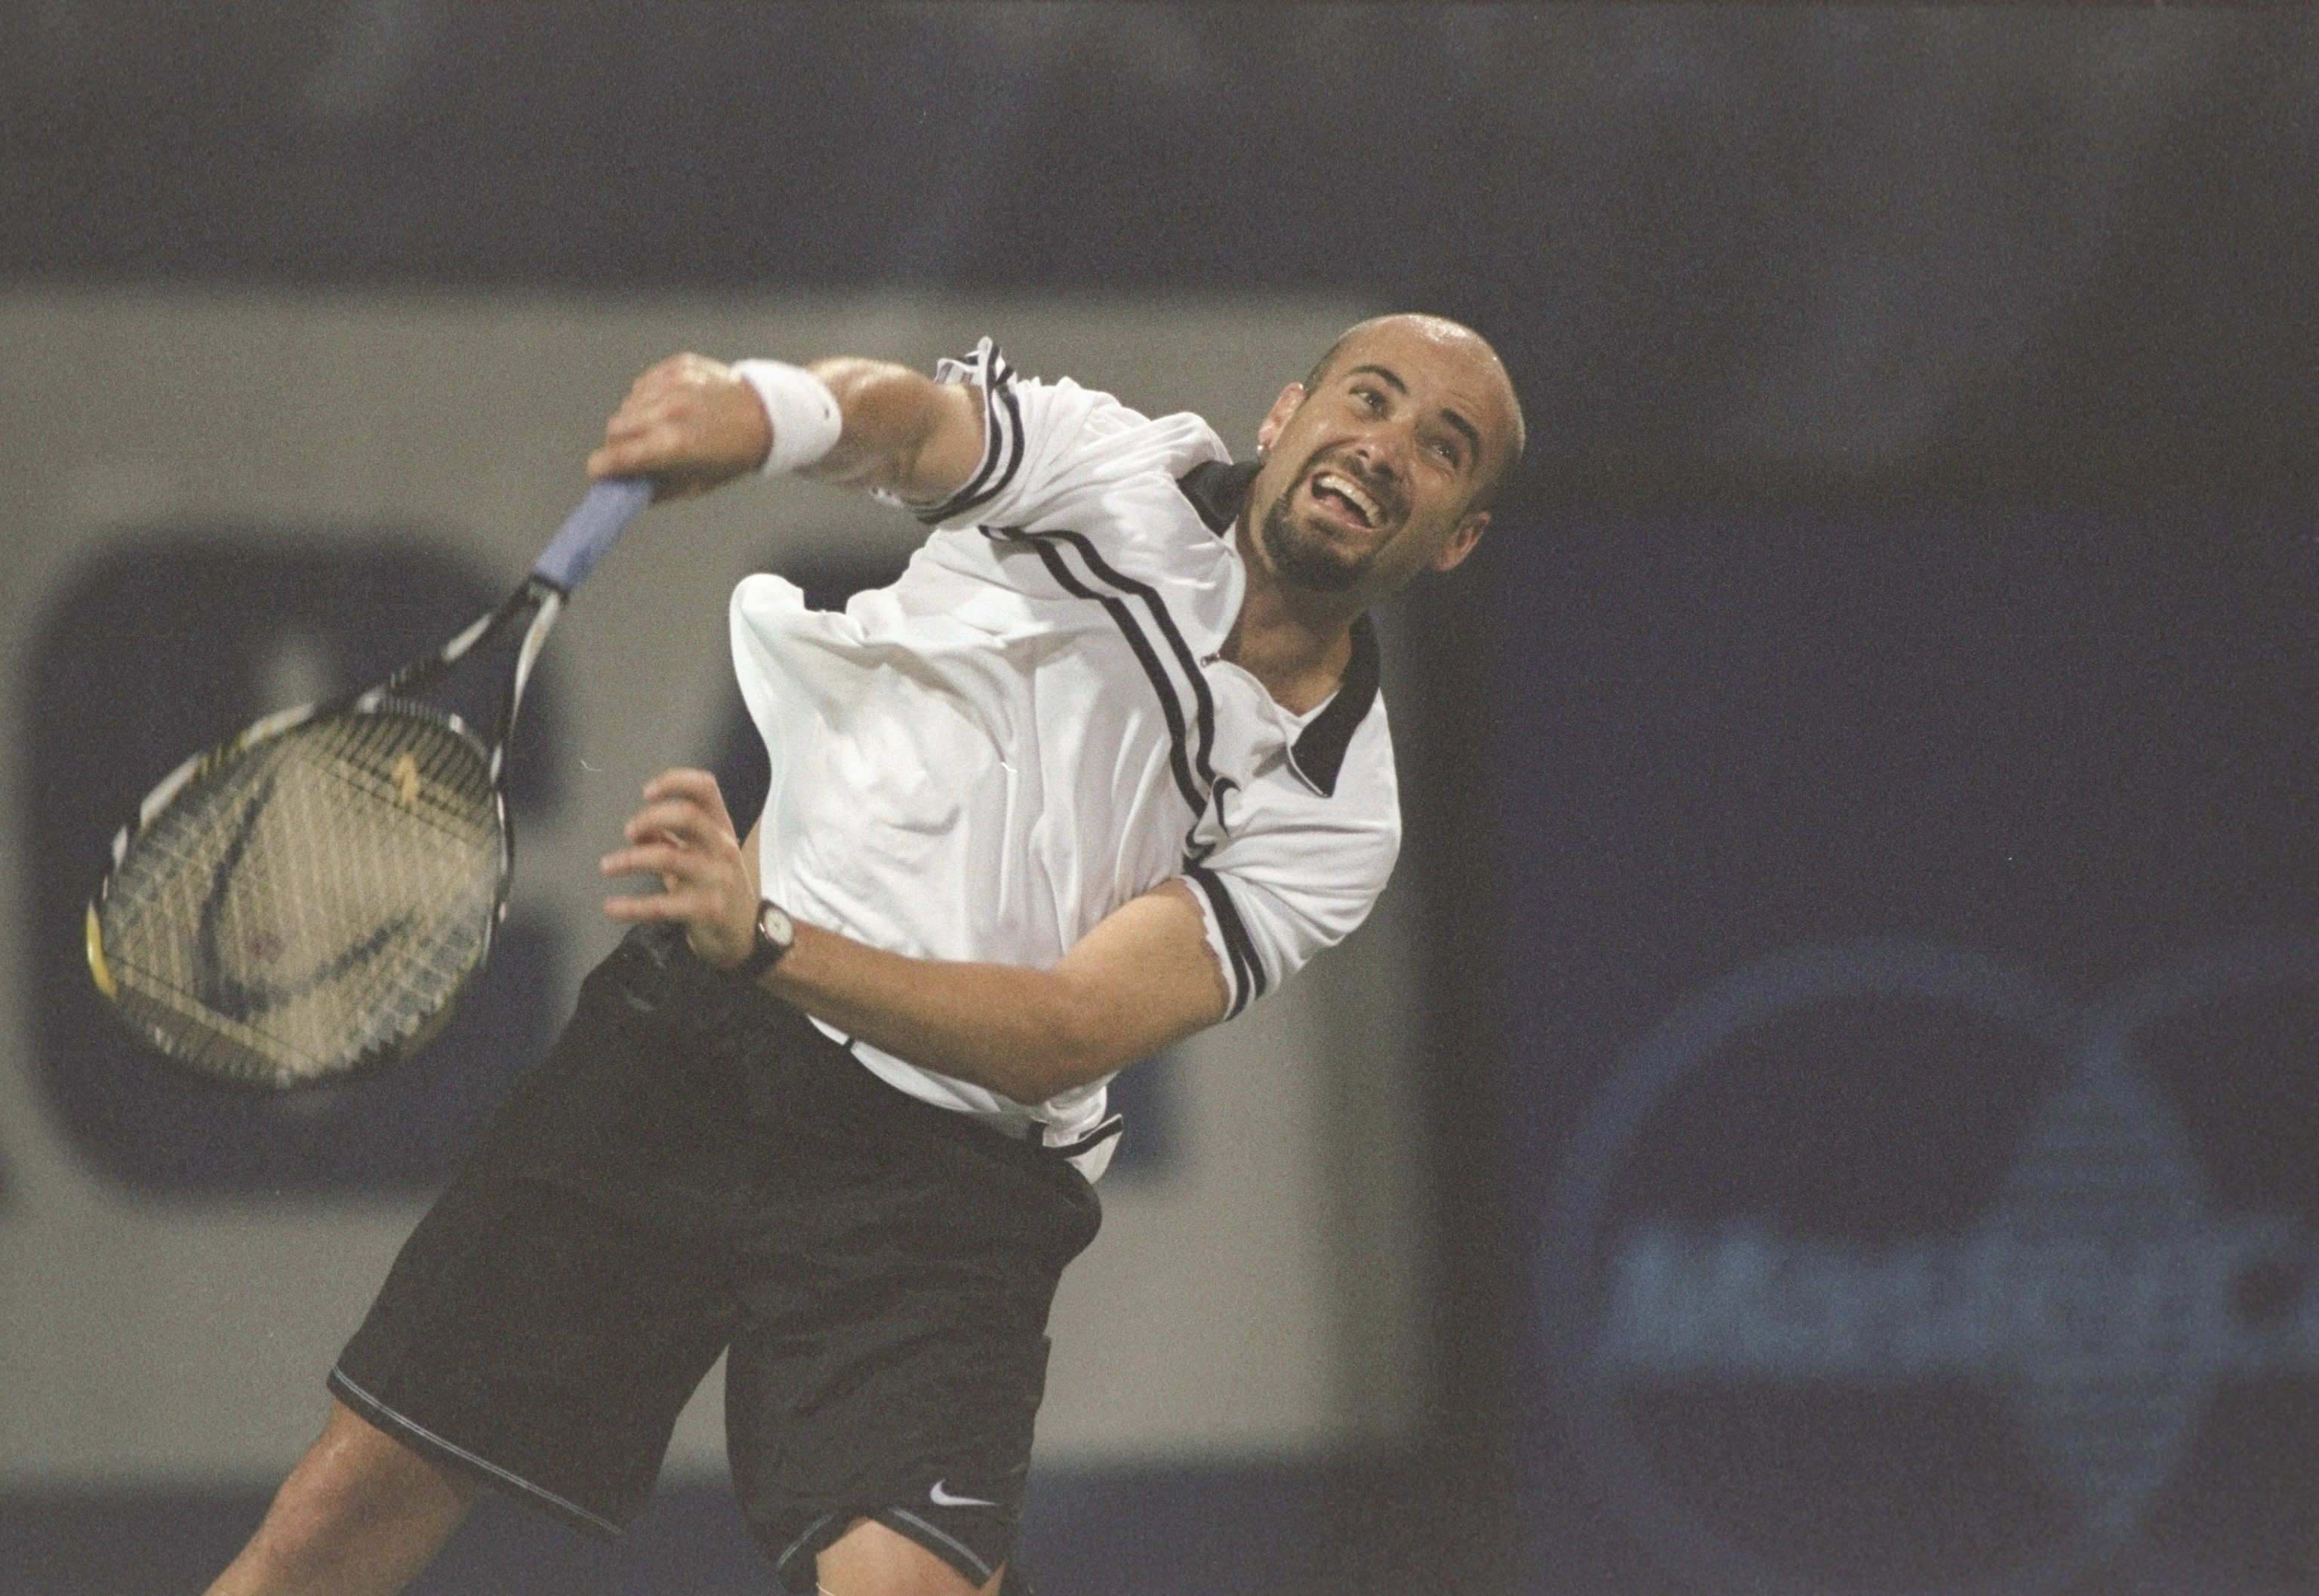 On This Day, 1997 A 141st-ranked Andre Agassi takes